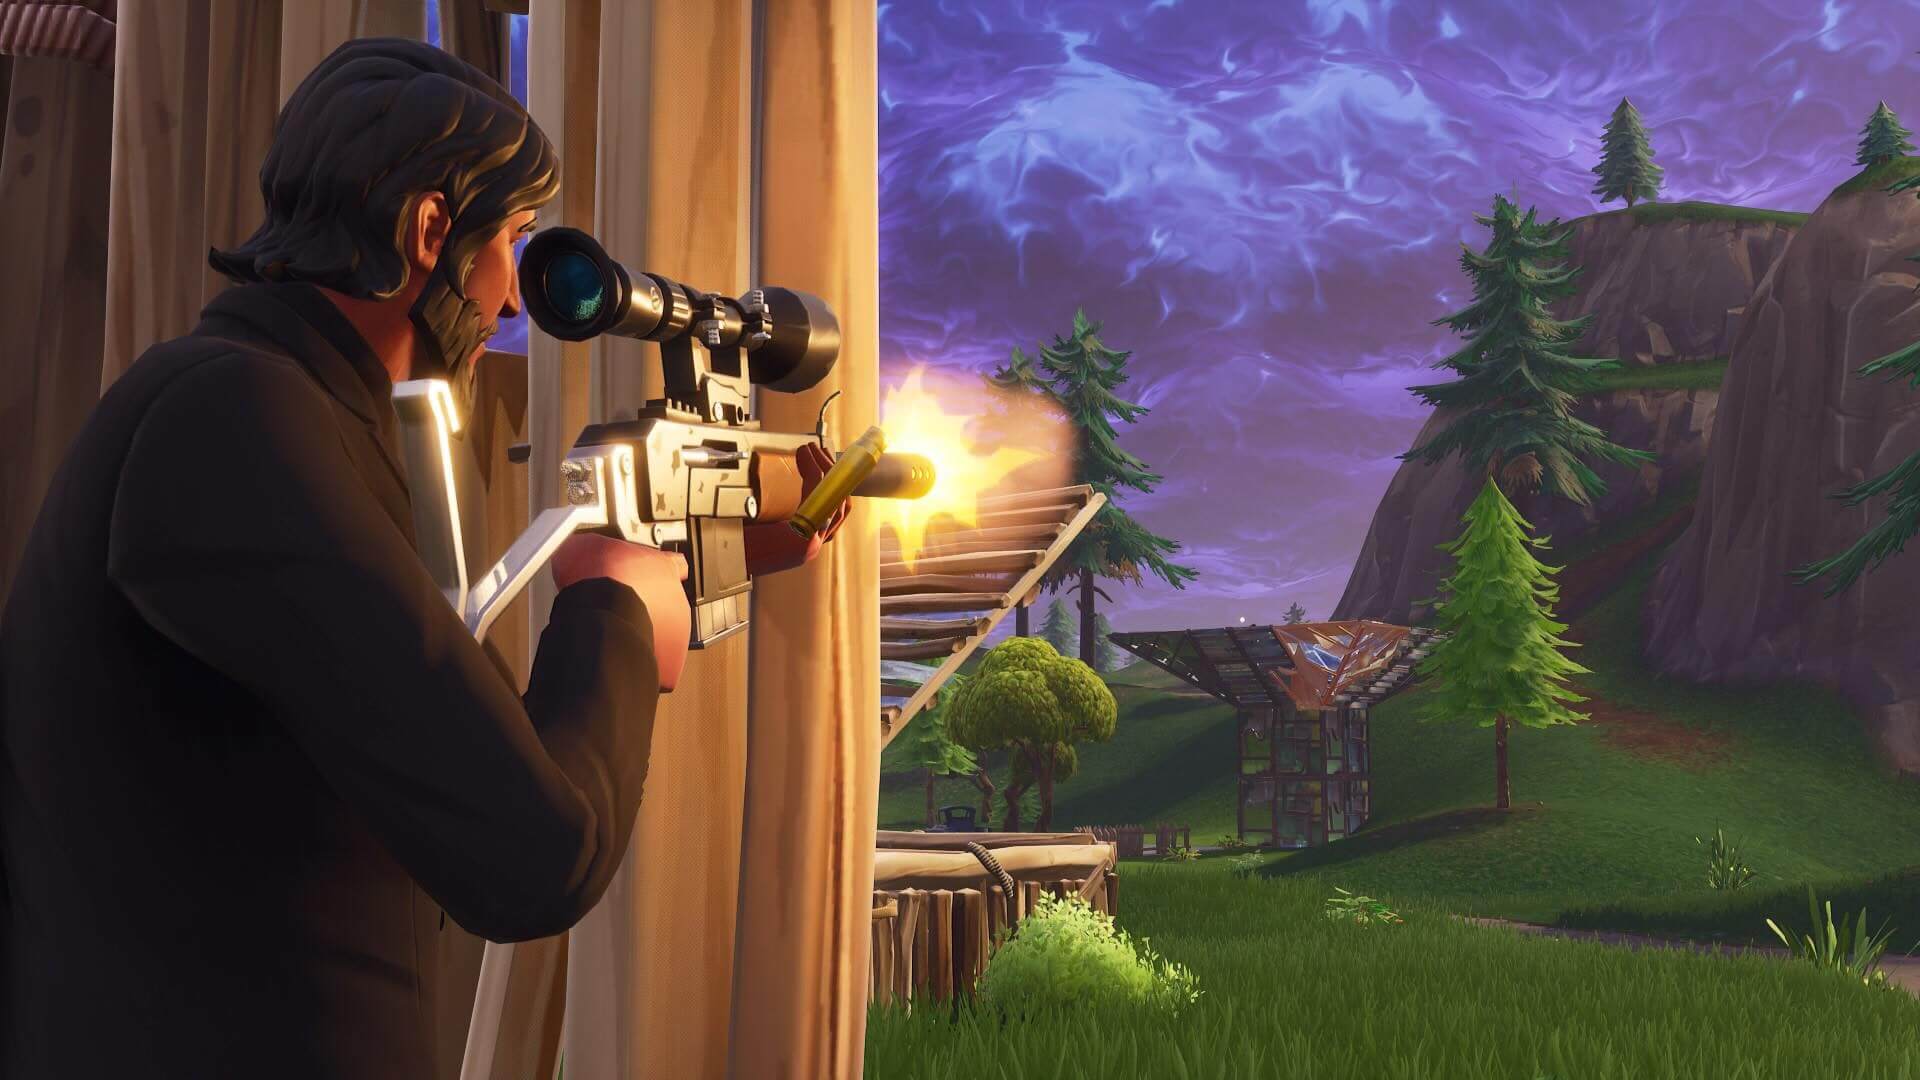 About The Explosion of The Number of Fortnite Players